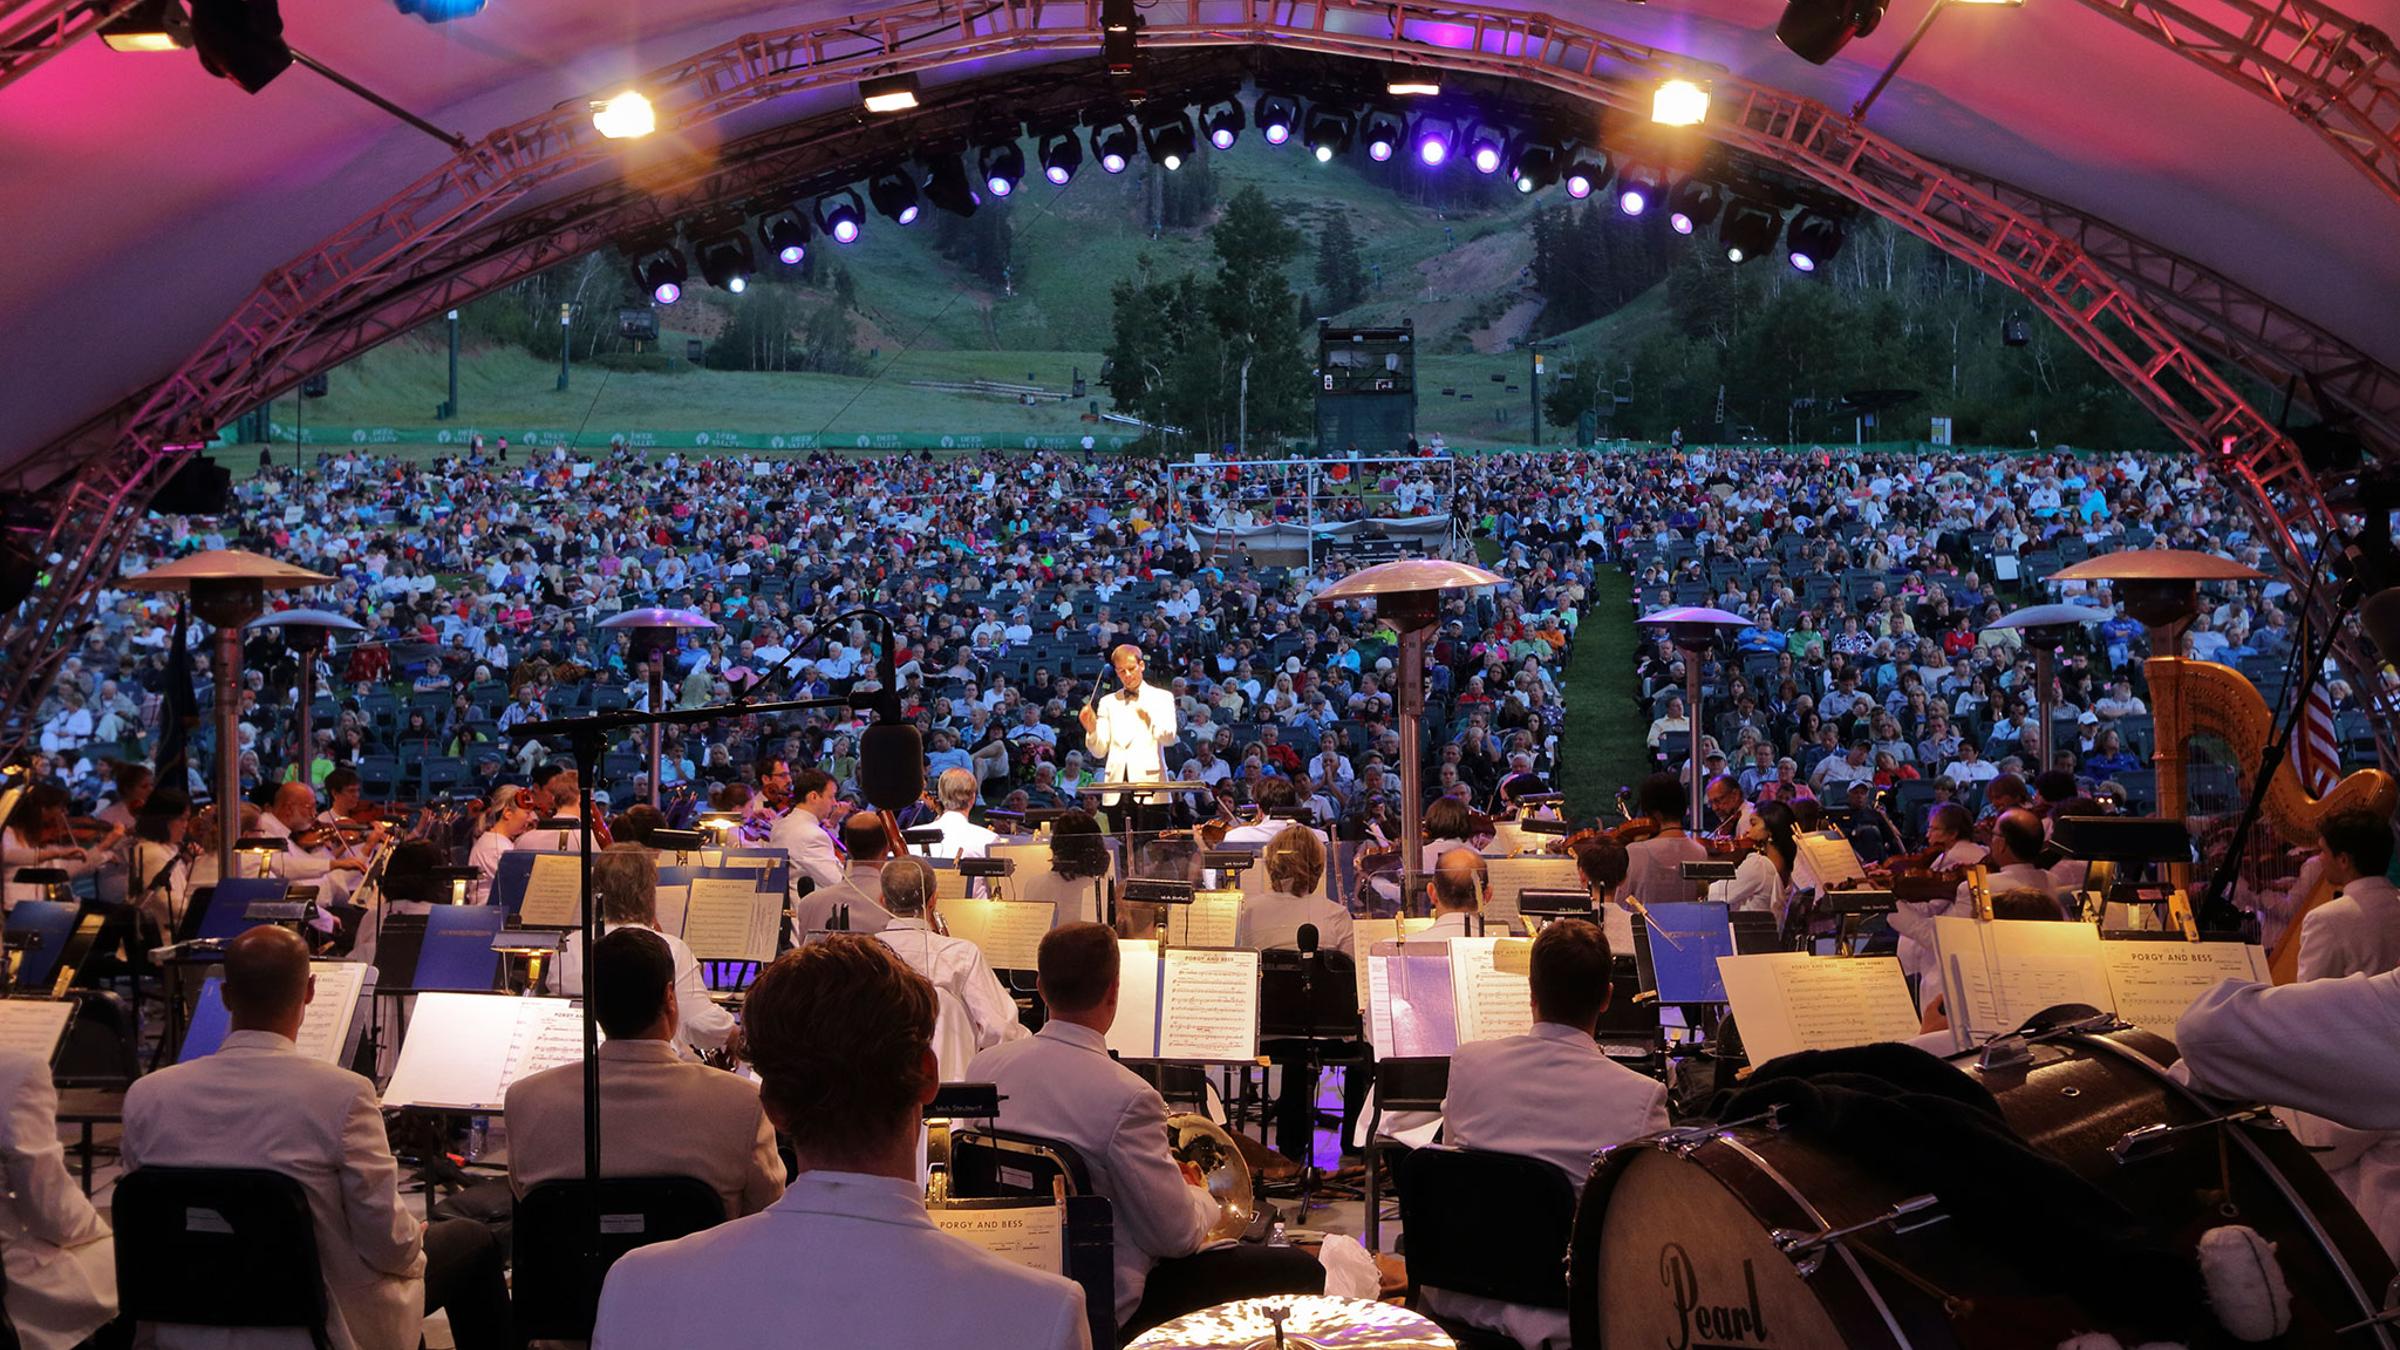 Utah Symphony performing in the Snow Park Outdoor Ampitheater